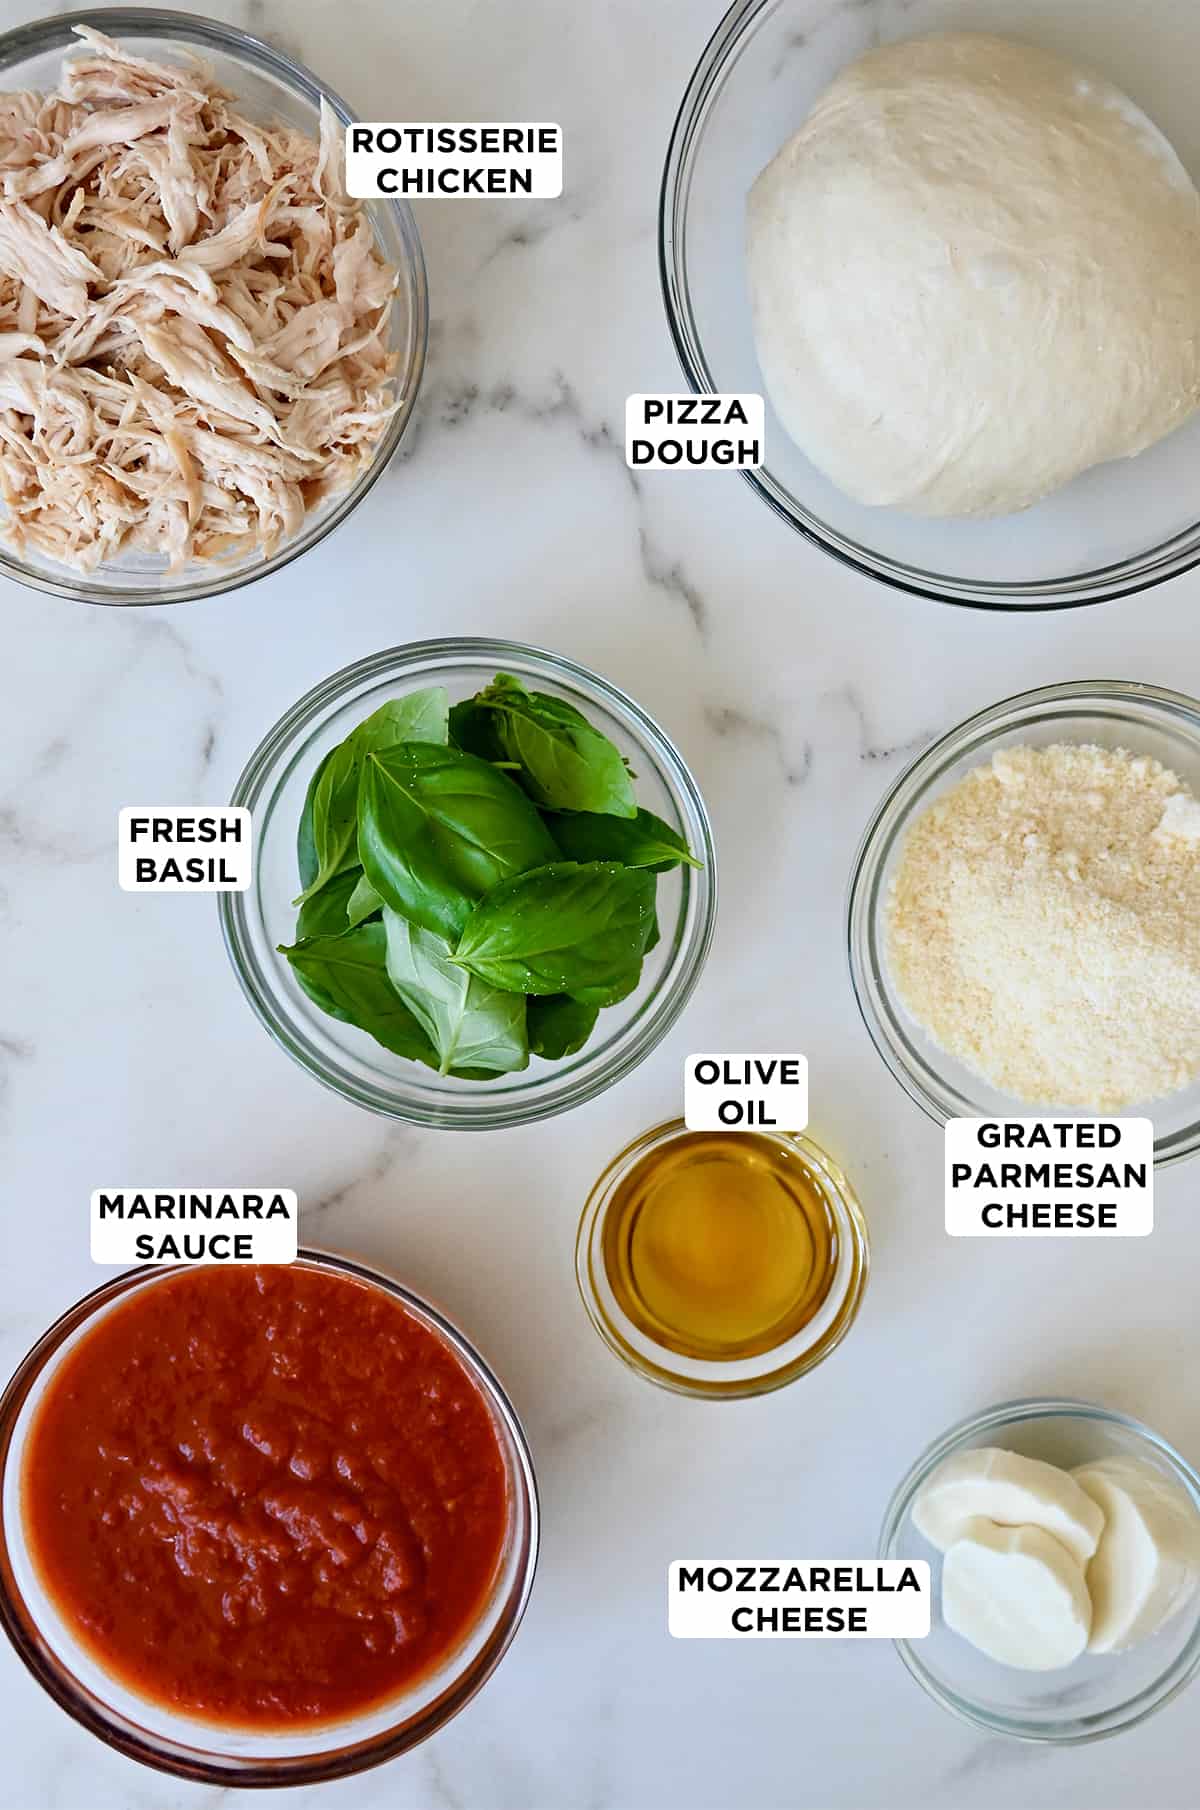 Various sizes of glass bowls containing shredded chicken, pizza dough, fresh basil, olive oil, grated parmesan cheese, mozzarella cheese and marinara sauce.